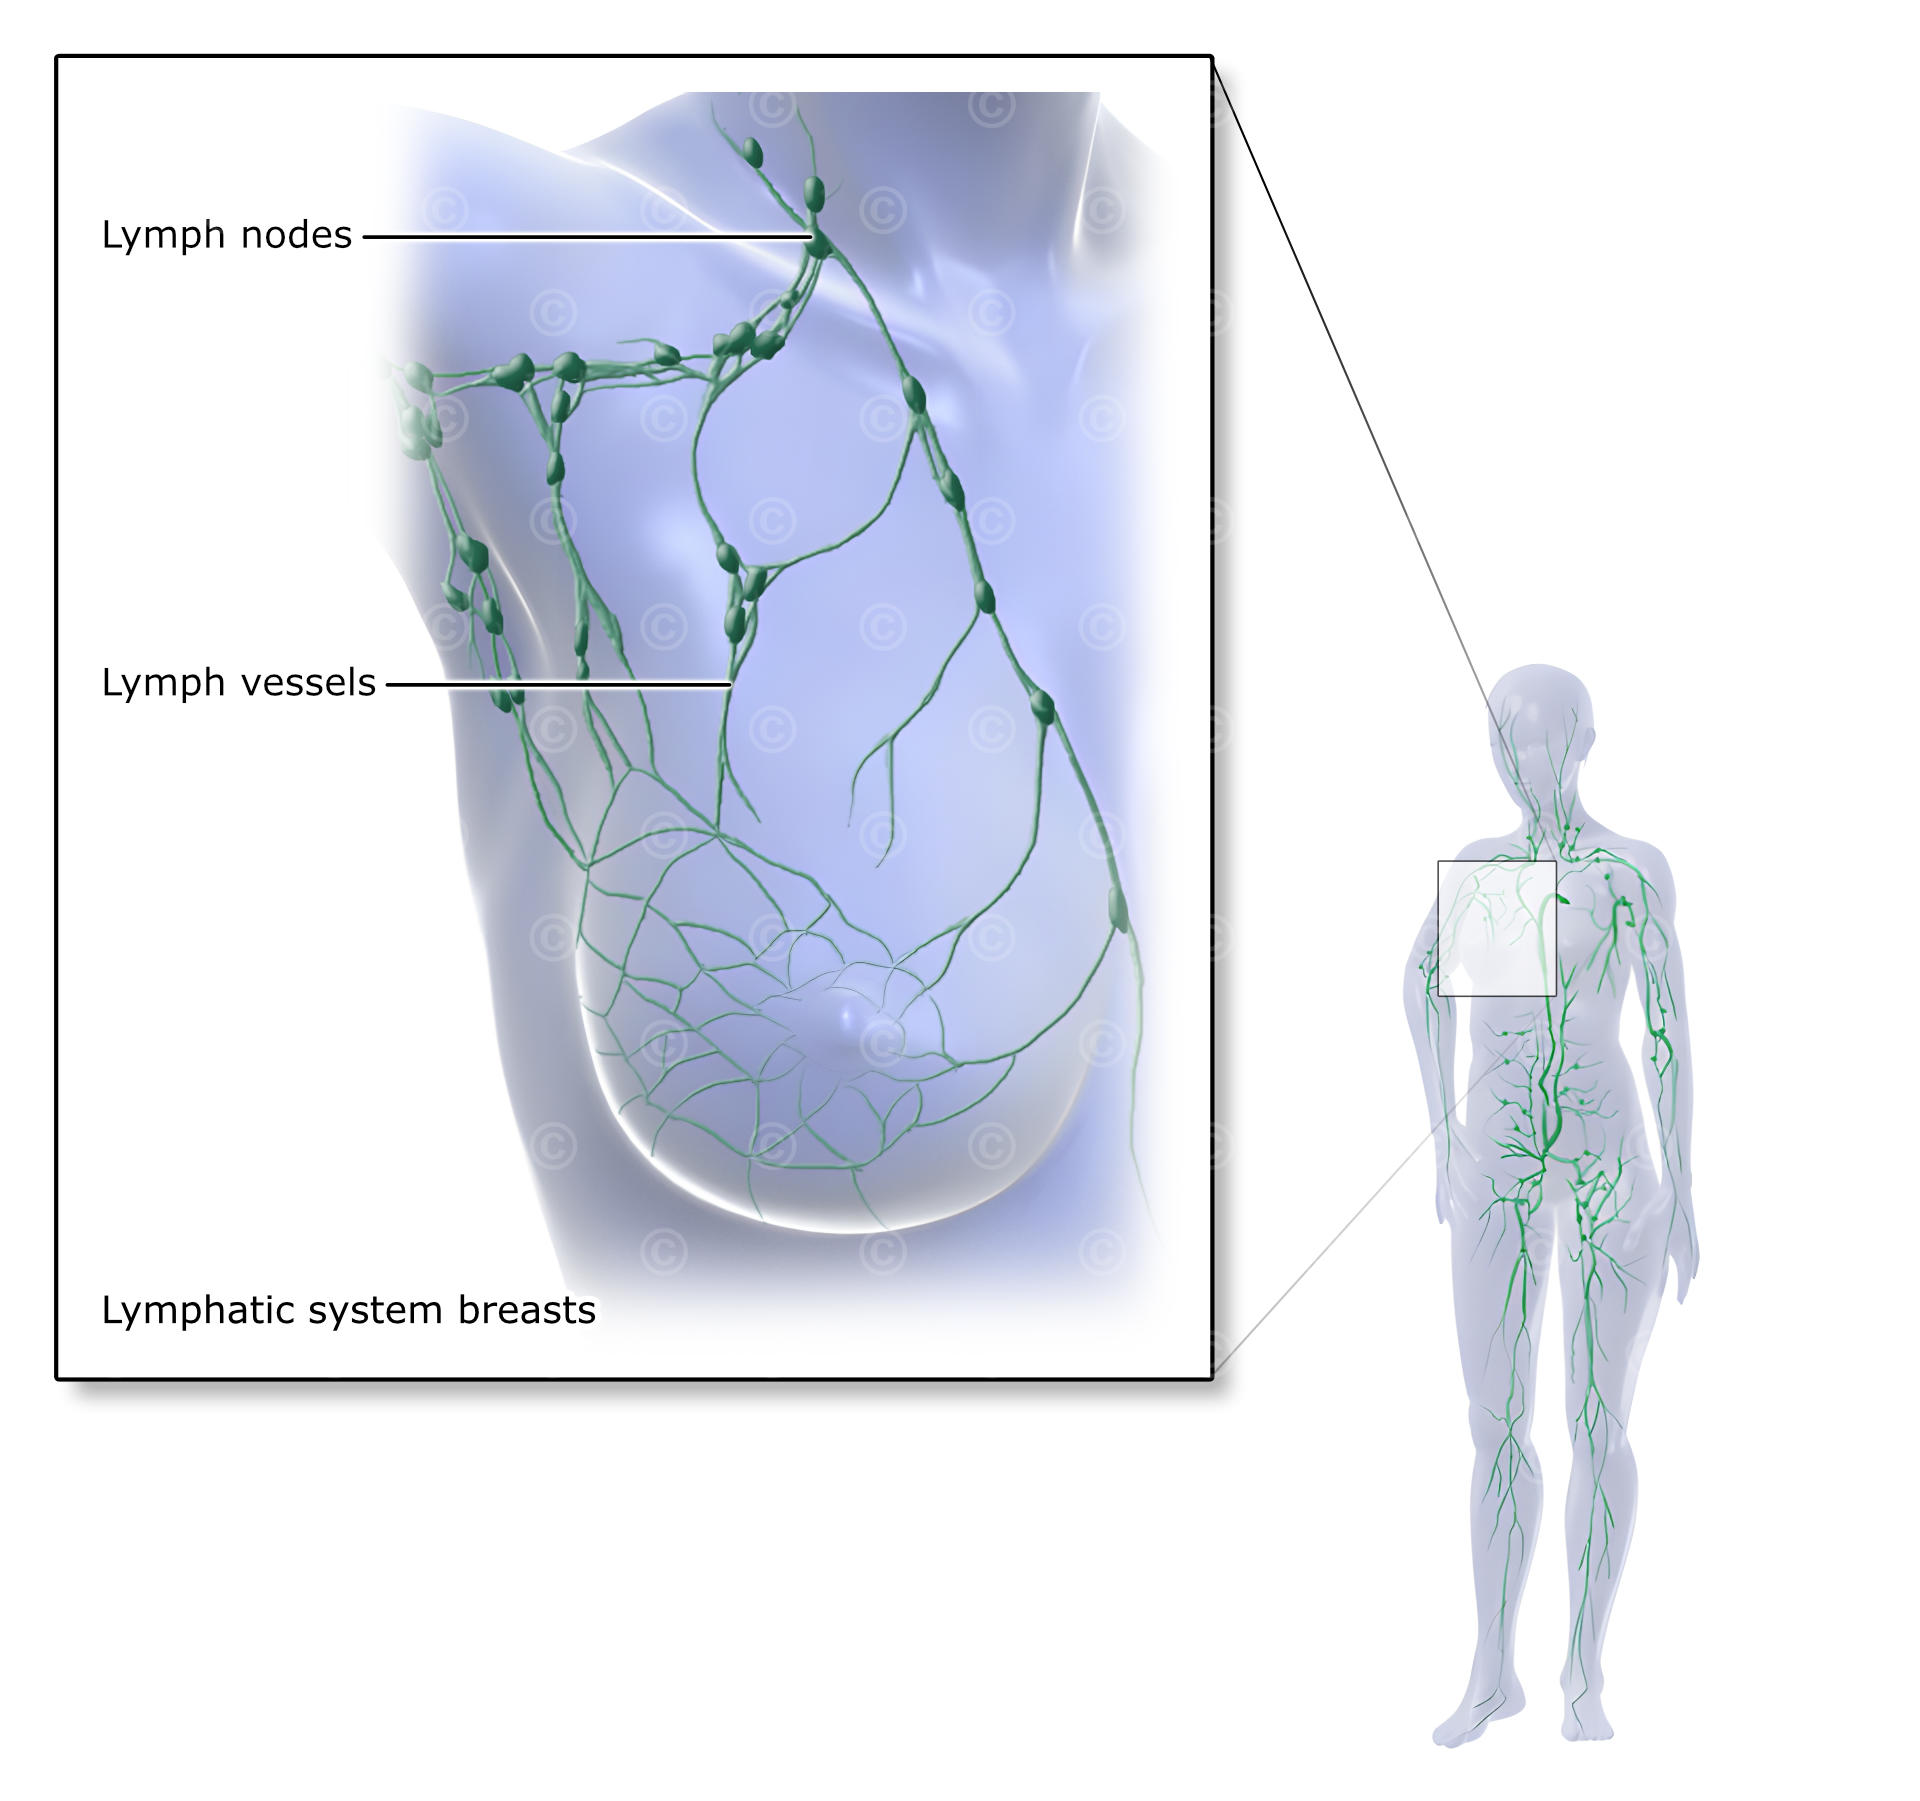 Lymphatic system breasts